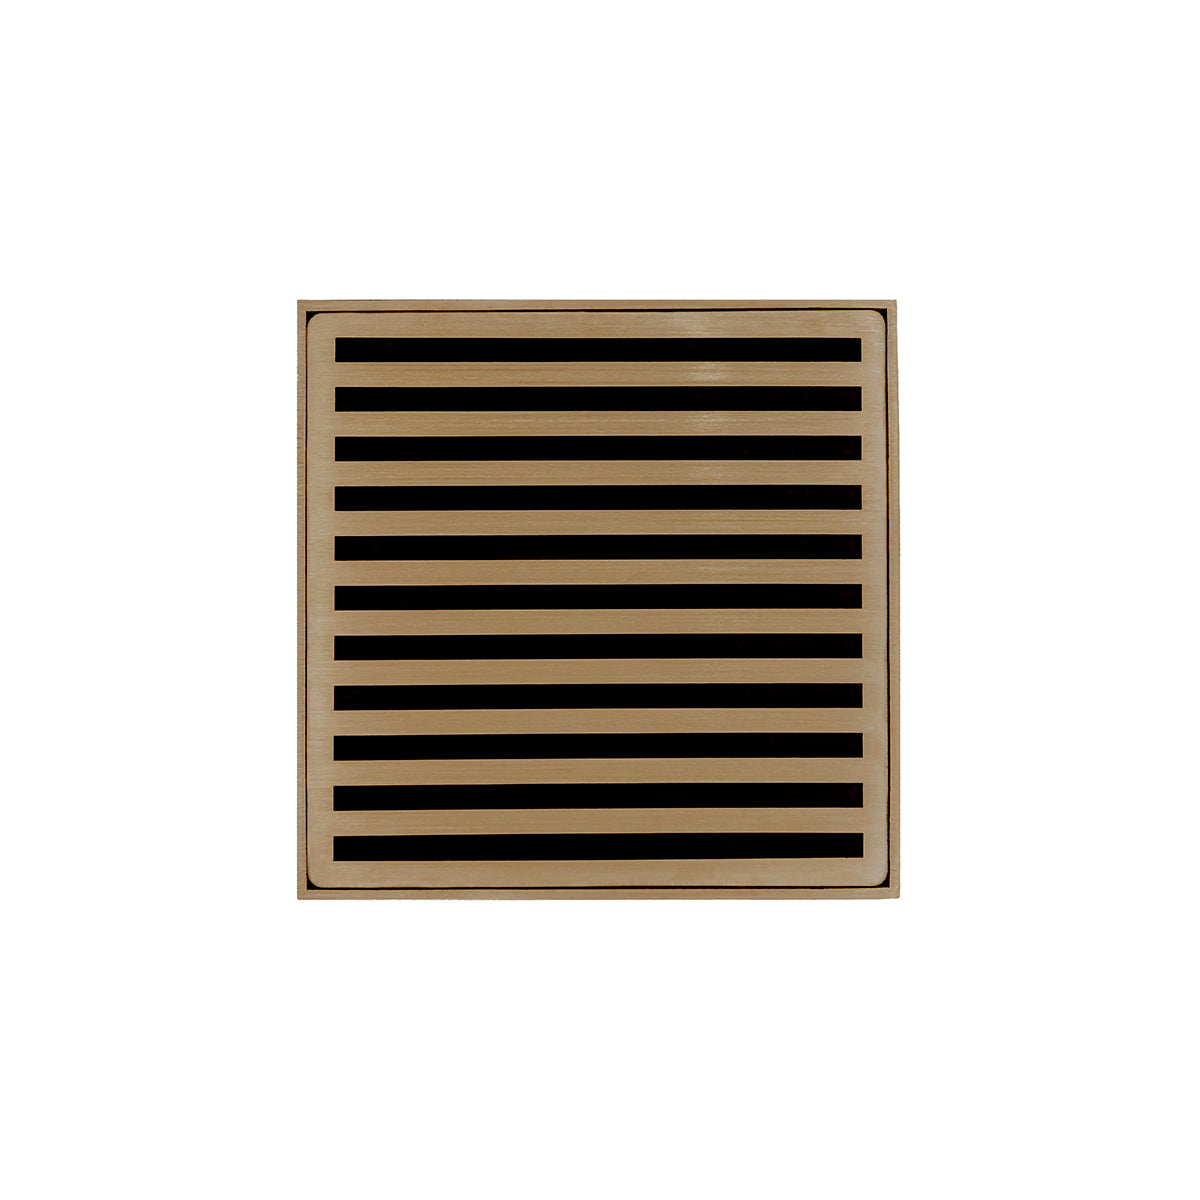 Infinity Drain 5" x 5" ND 5 Premium Center Drain Kit with Lines Pattern Decorative Plate with ABS Drain Body, 2" Outlet